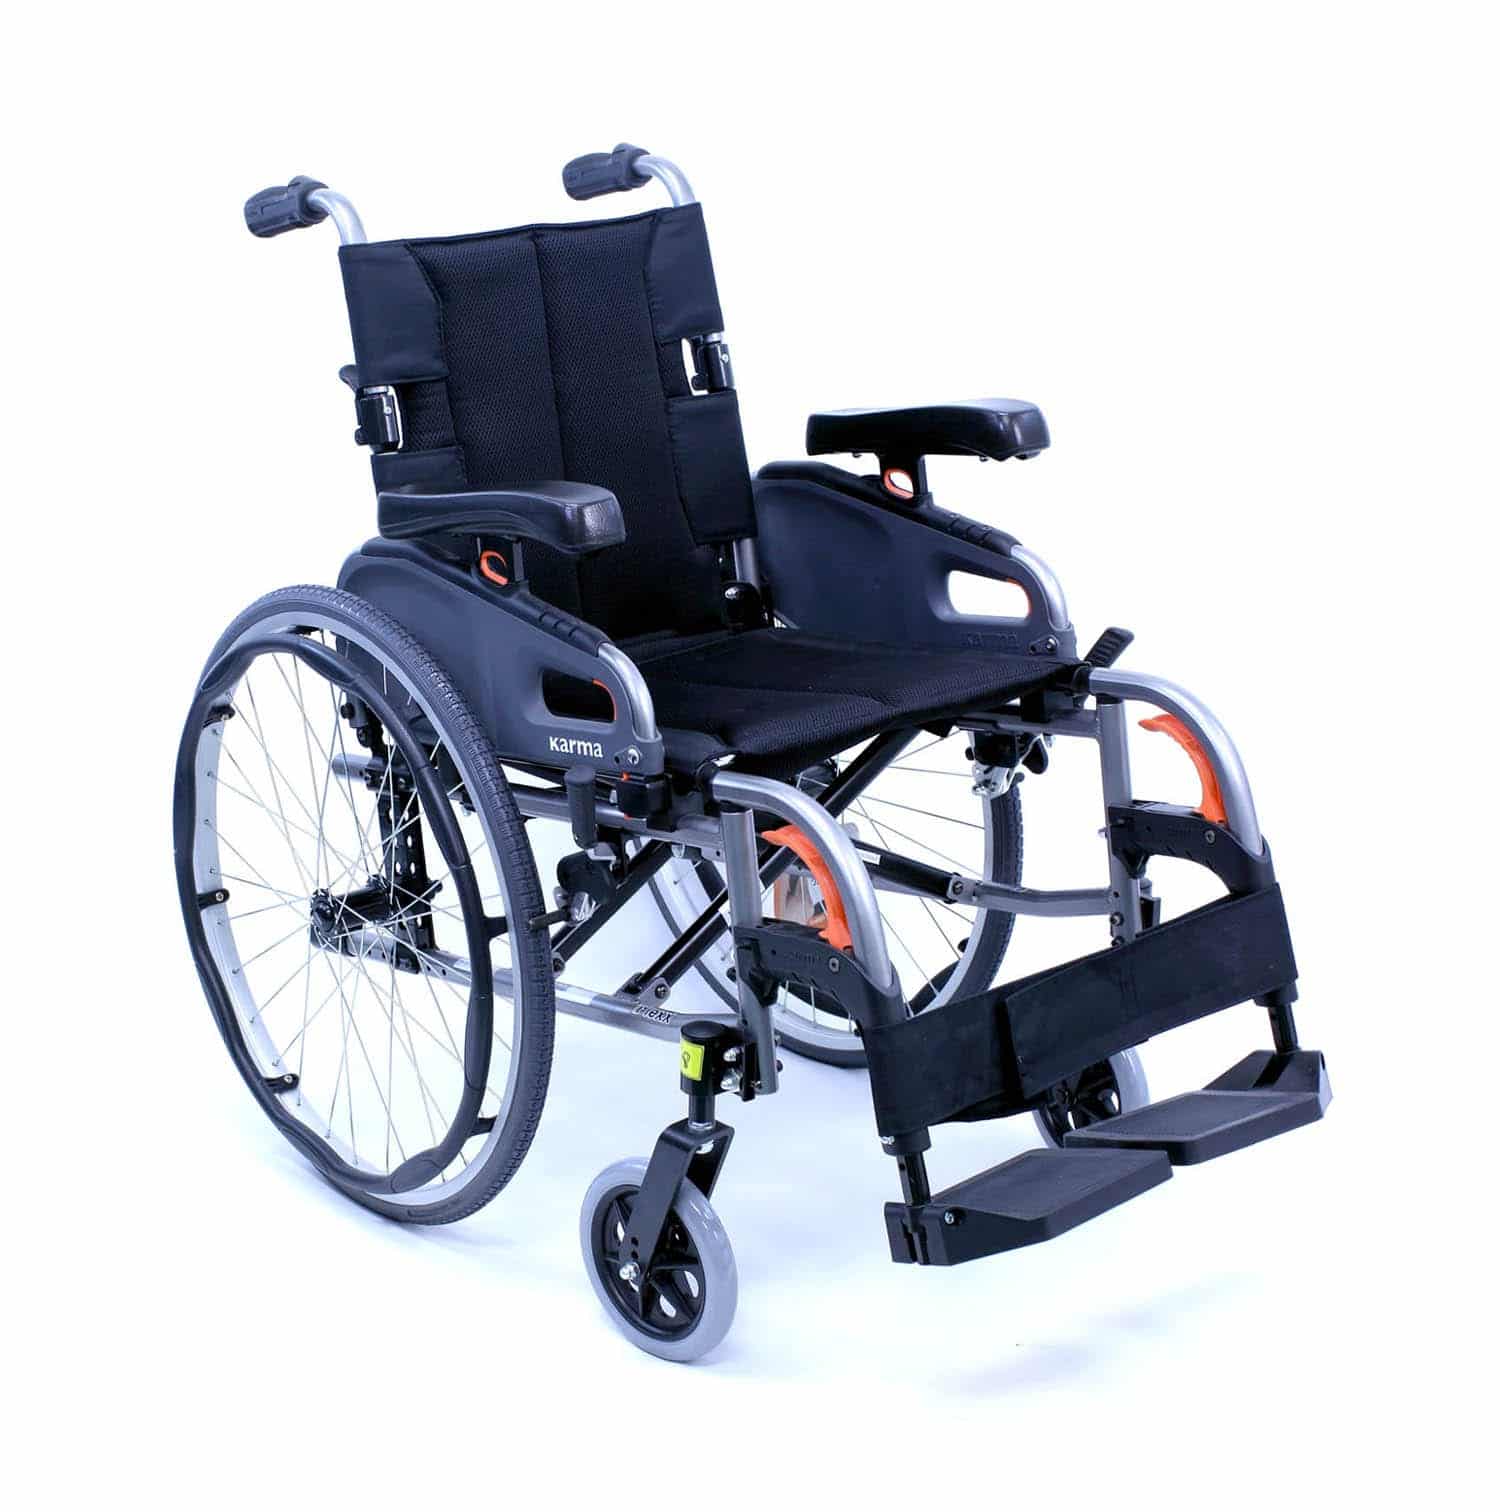 Drive Cruiser lll Light Weight wheelchair with Flip back Removable Arms